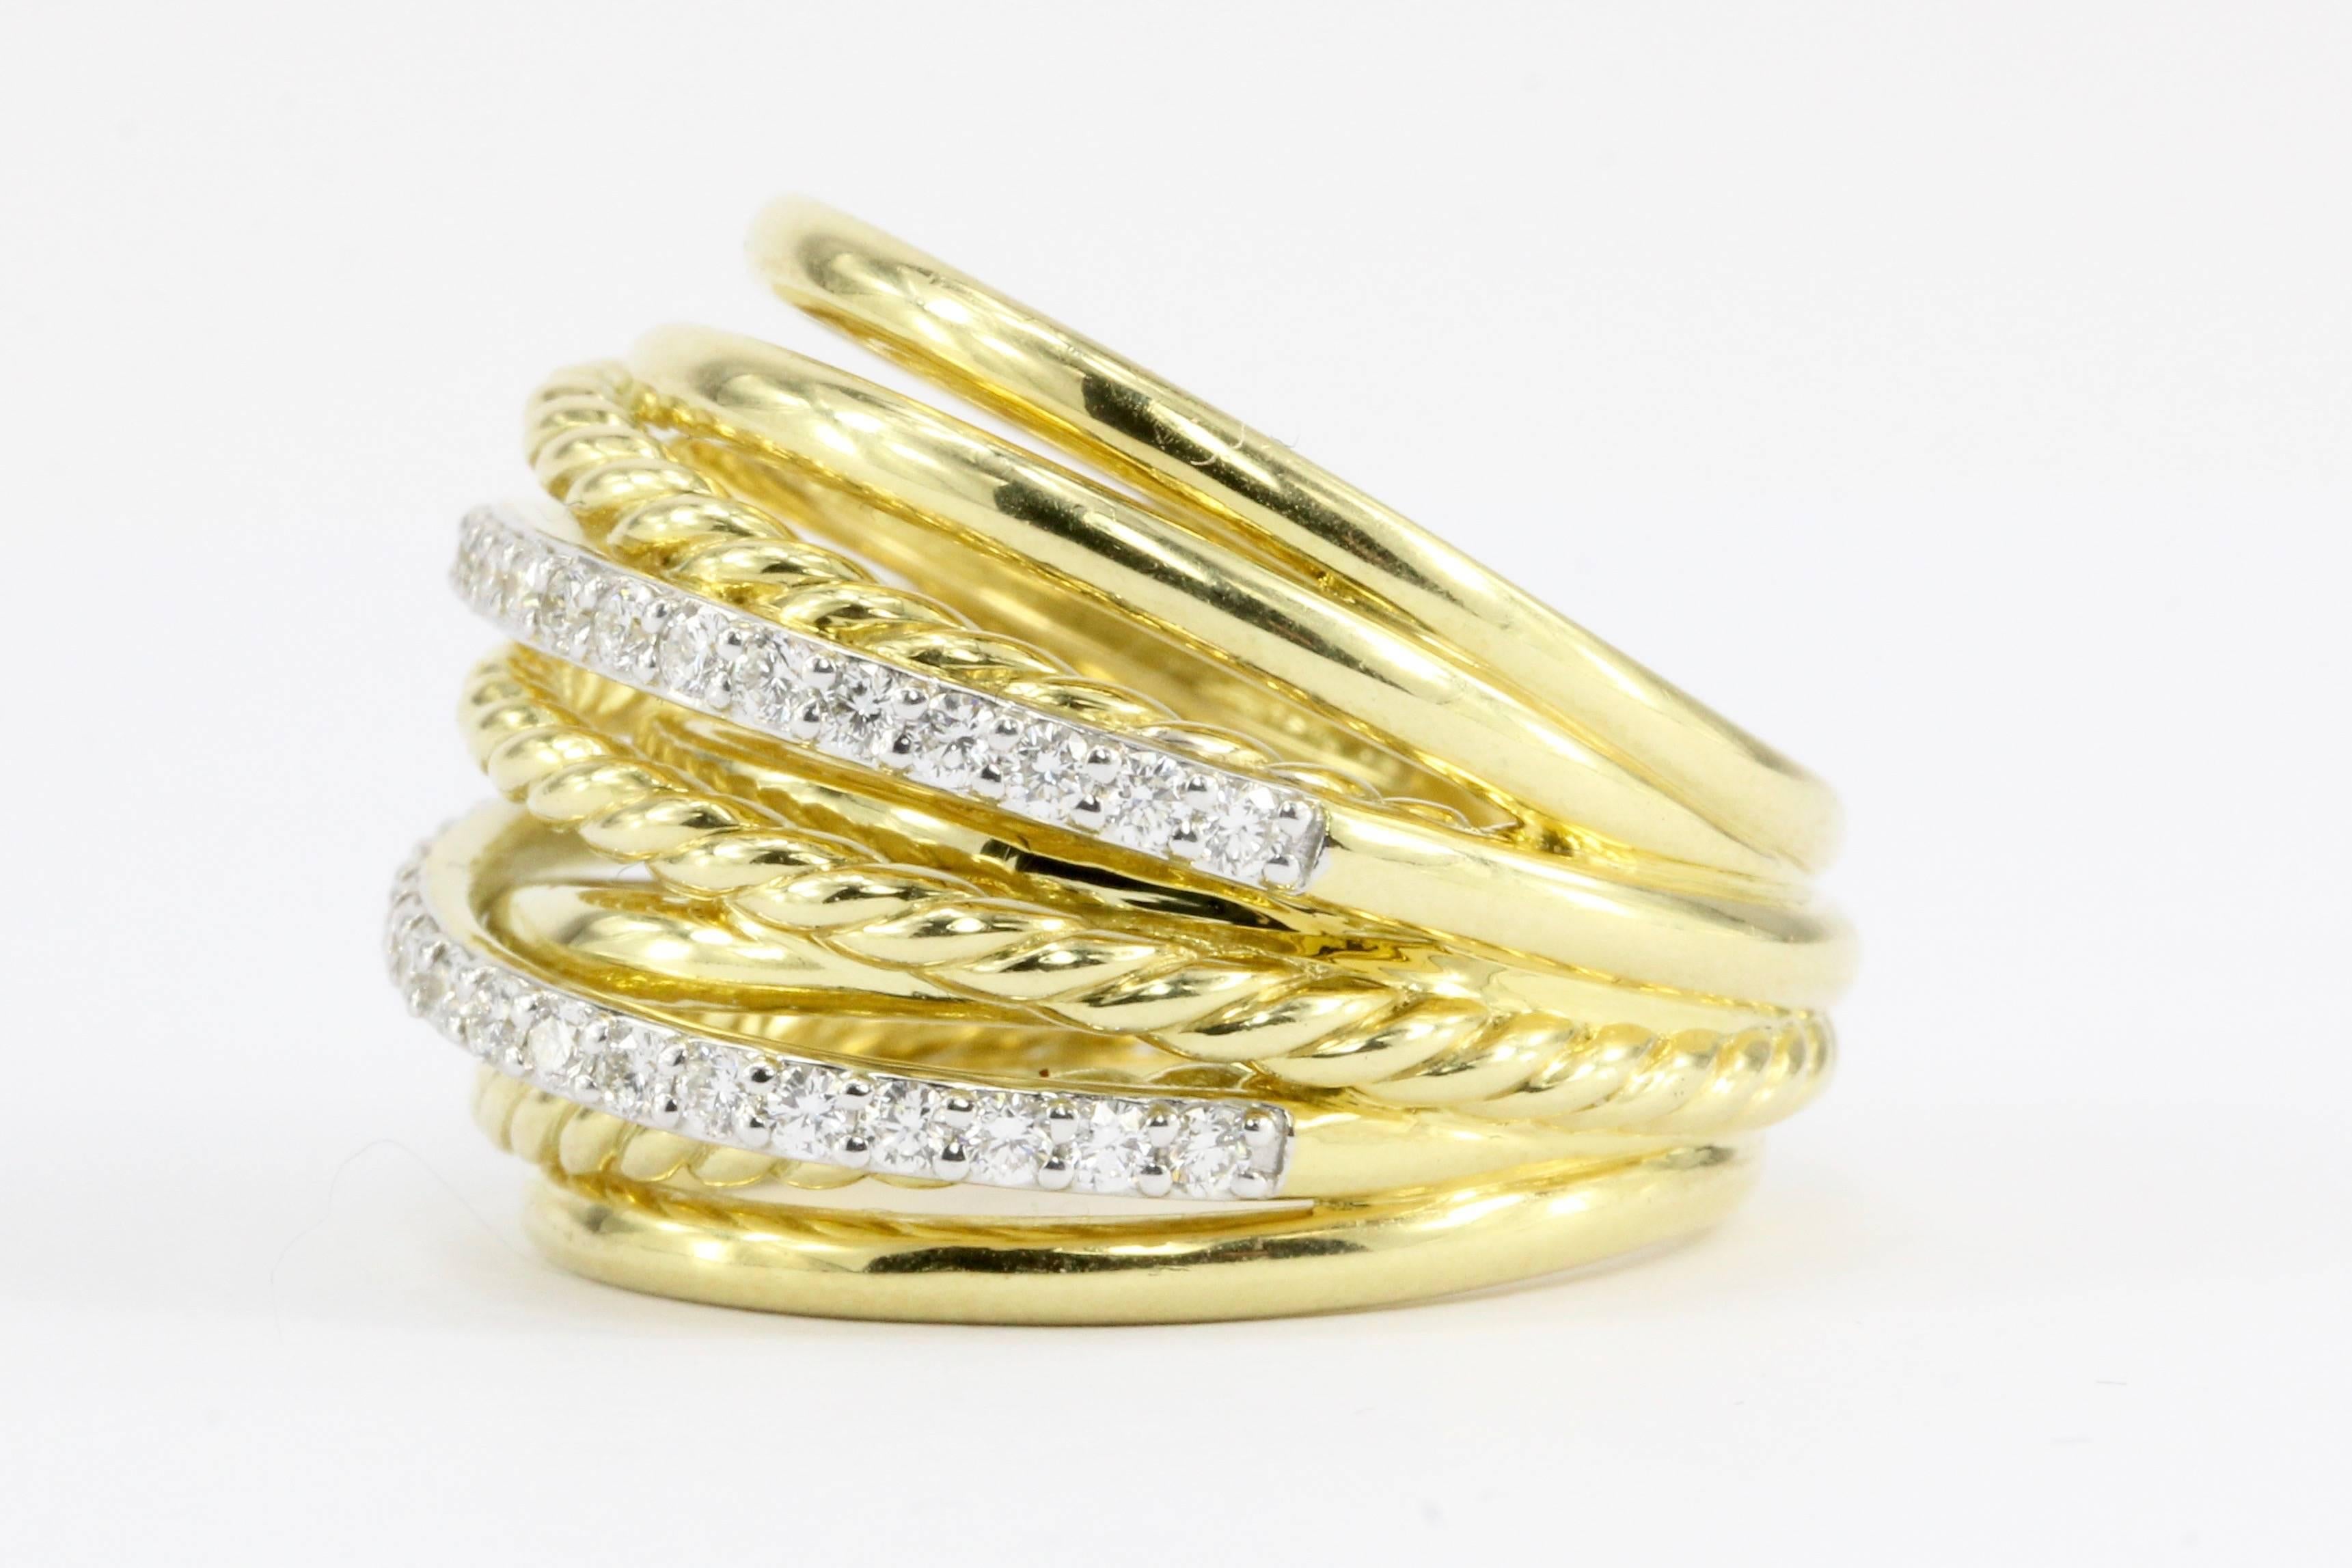 18K Yellow Gold & Diamond David Yurman Crossover Rope Dome Band

Hallmarks: Hallmarks have been polished out inside, but is guaranteed authentic

Primary Stone: Diamond

Stone Weight: .48 CTW (48 x .01)

Diamond Color: G

Diamond Clarity:  VS2

Band